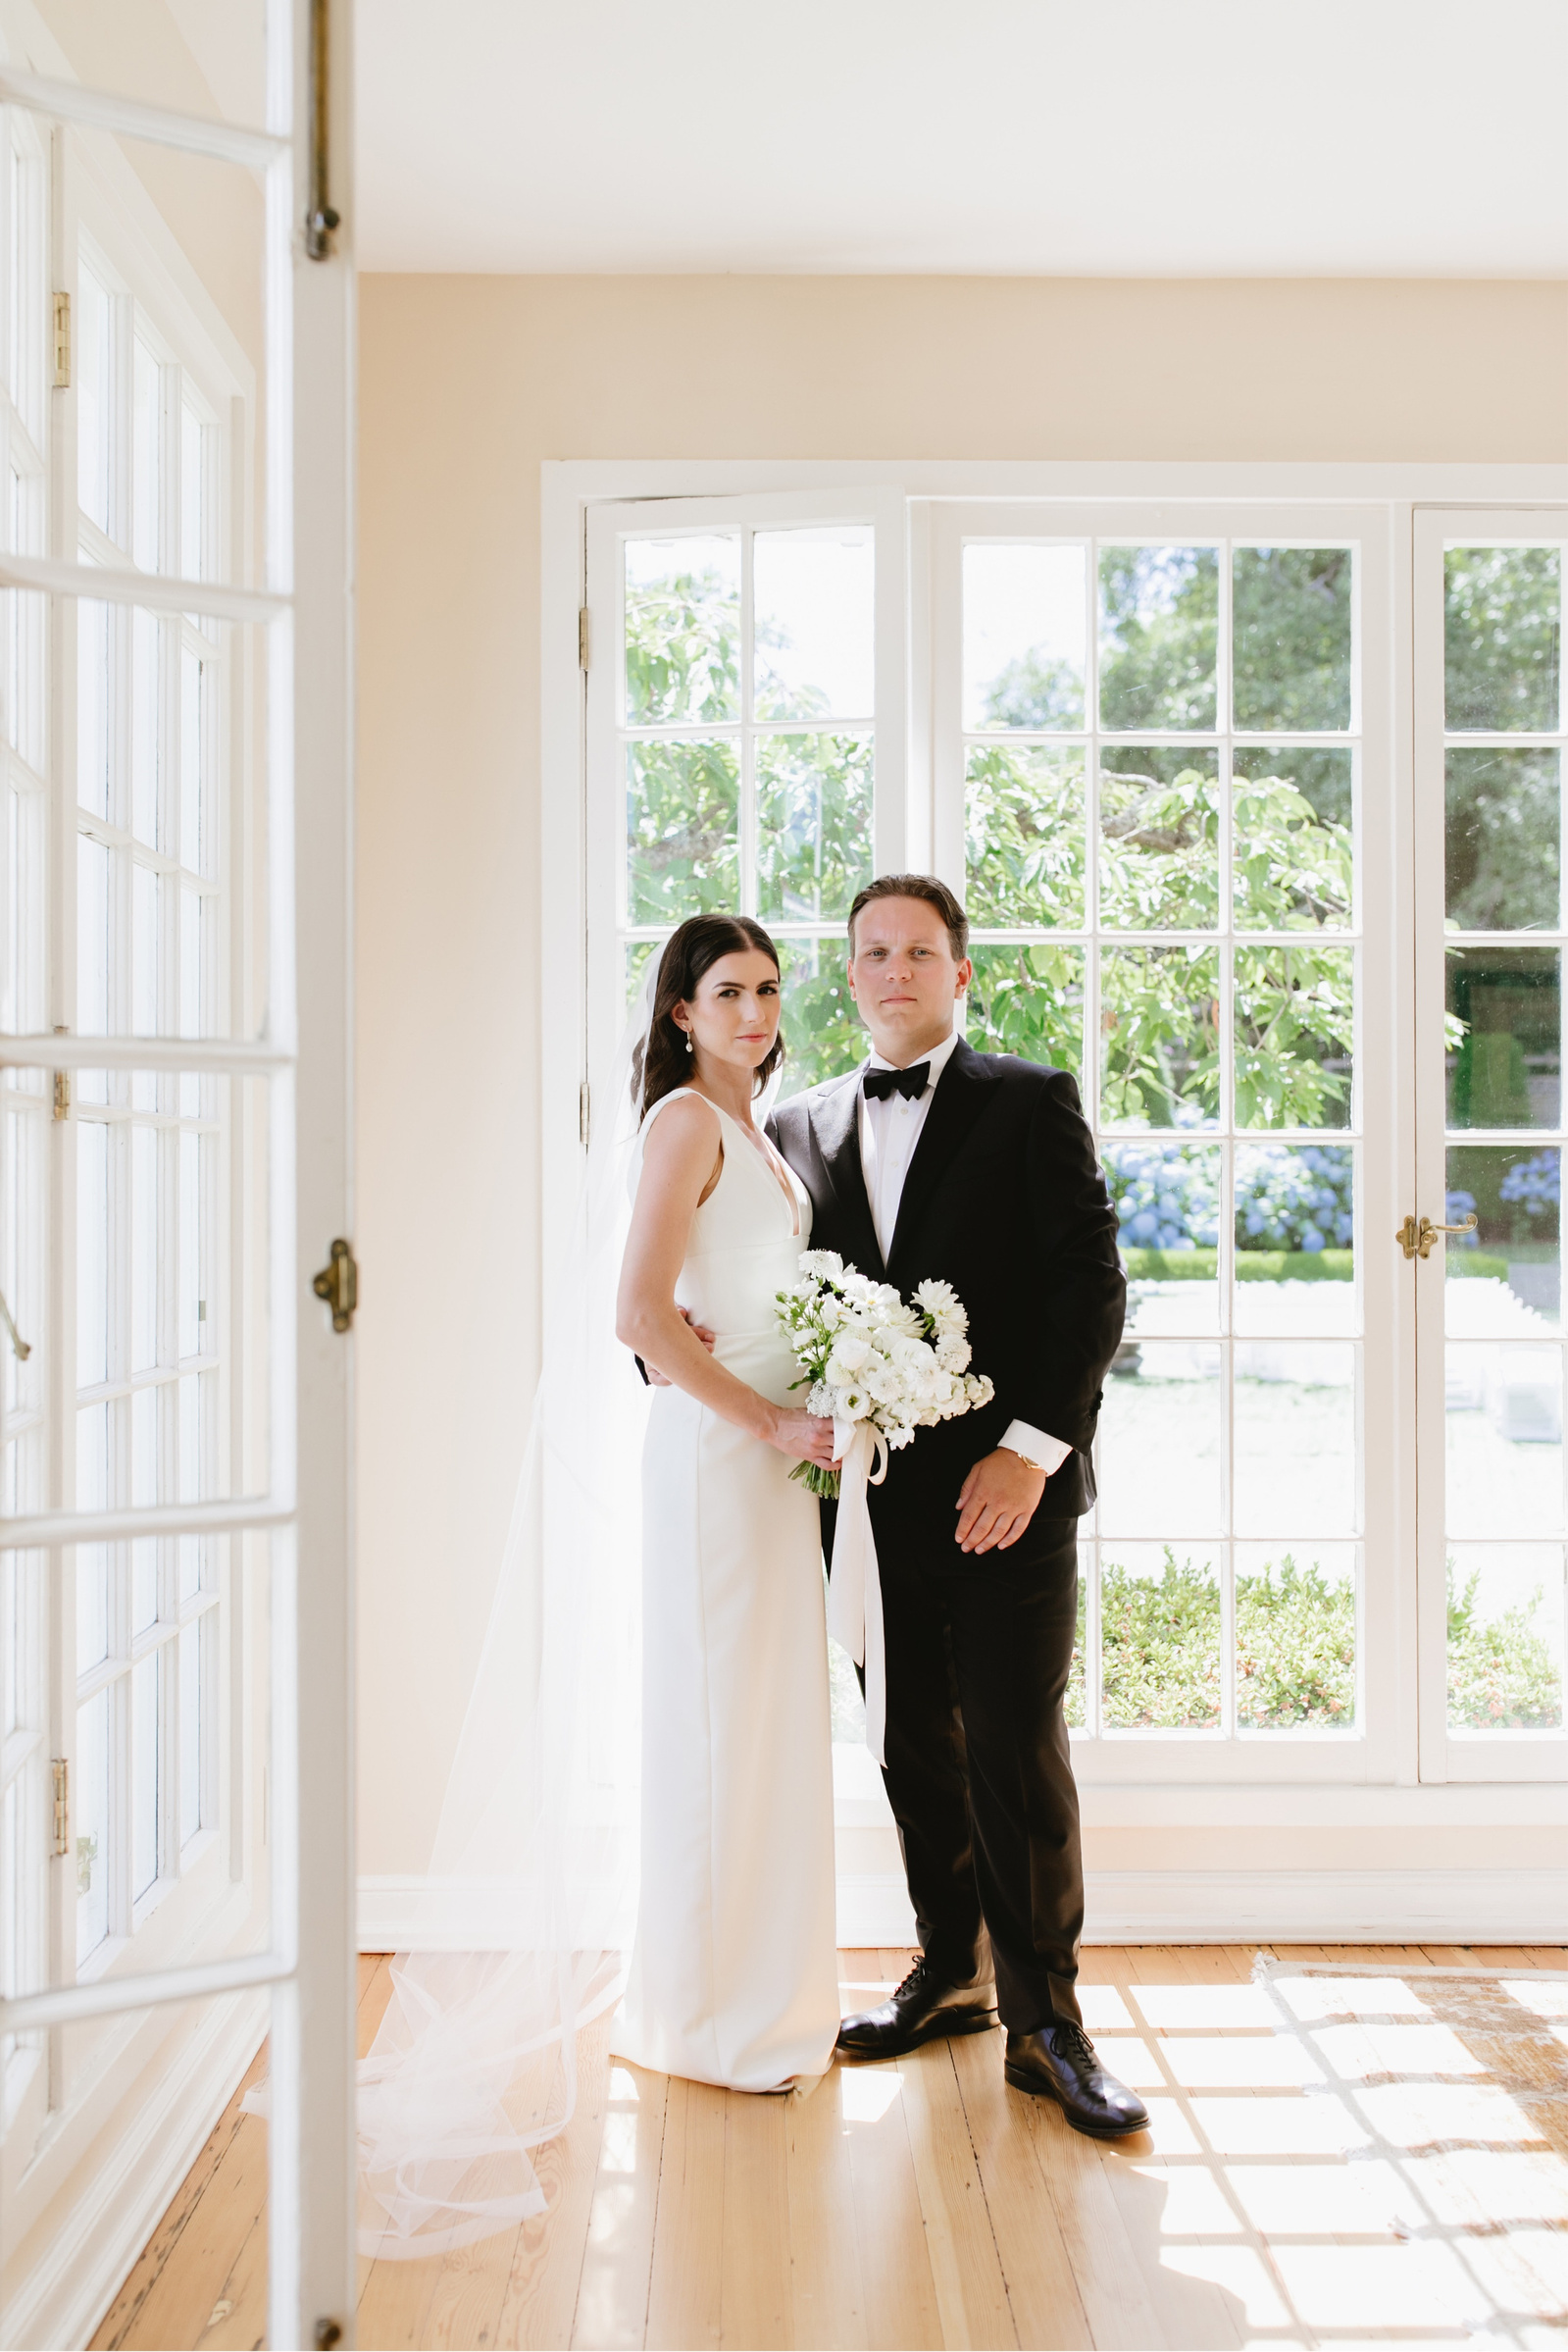 Classic black tie wedding with whimsical florals by Iris & Fig and planning by Eventful Moments. Breathtaking classic bridal details and decor with a view of the Seattle Sound and Downtown from The Admiral's House